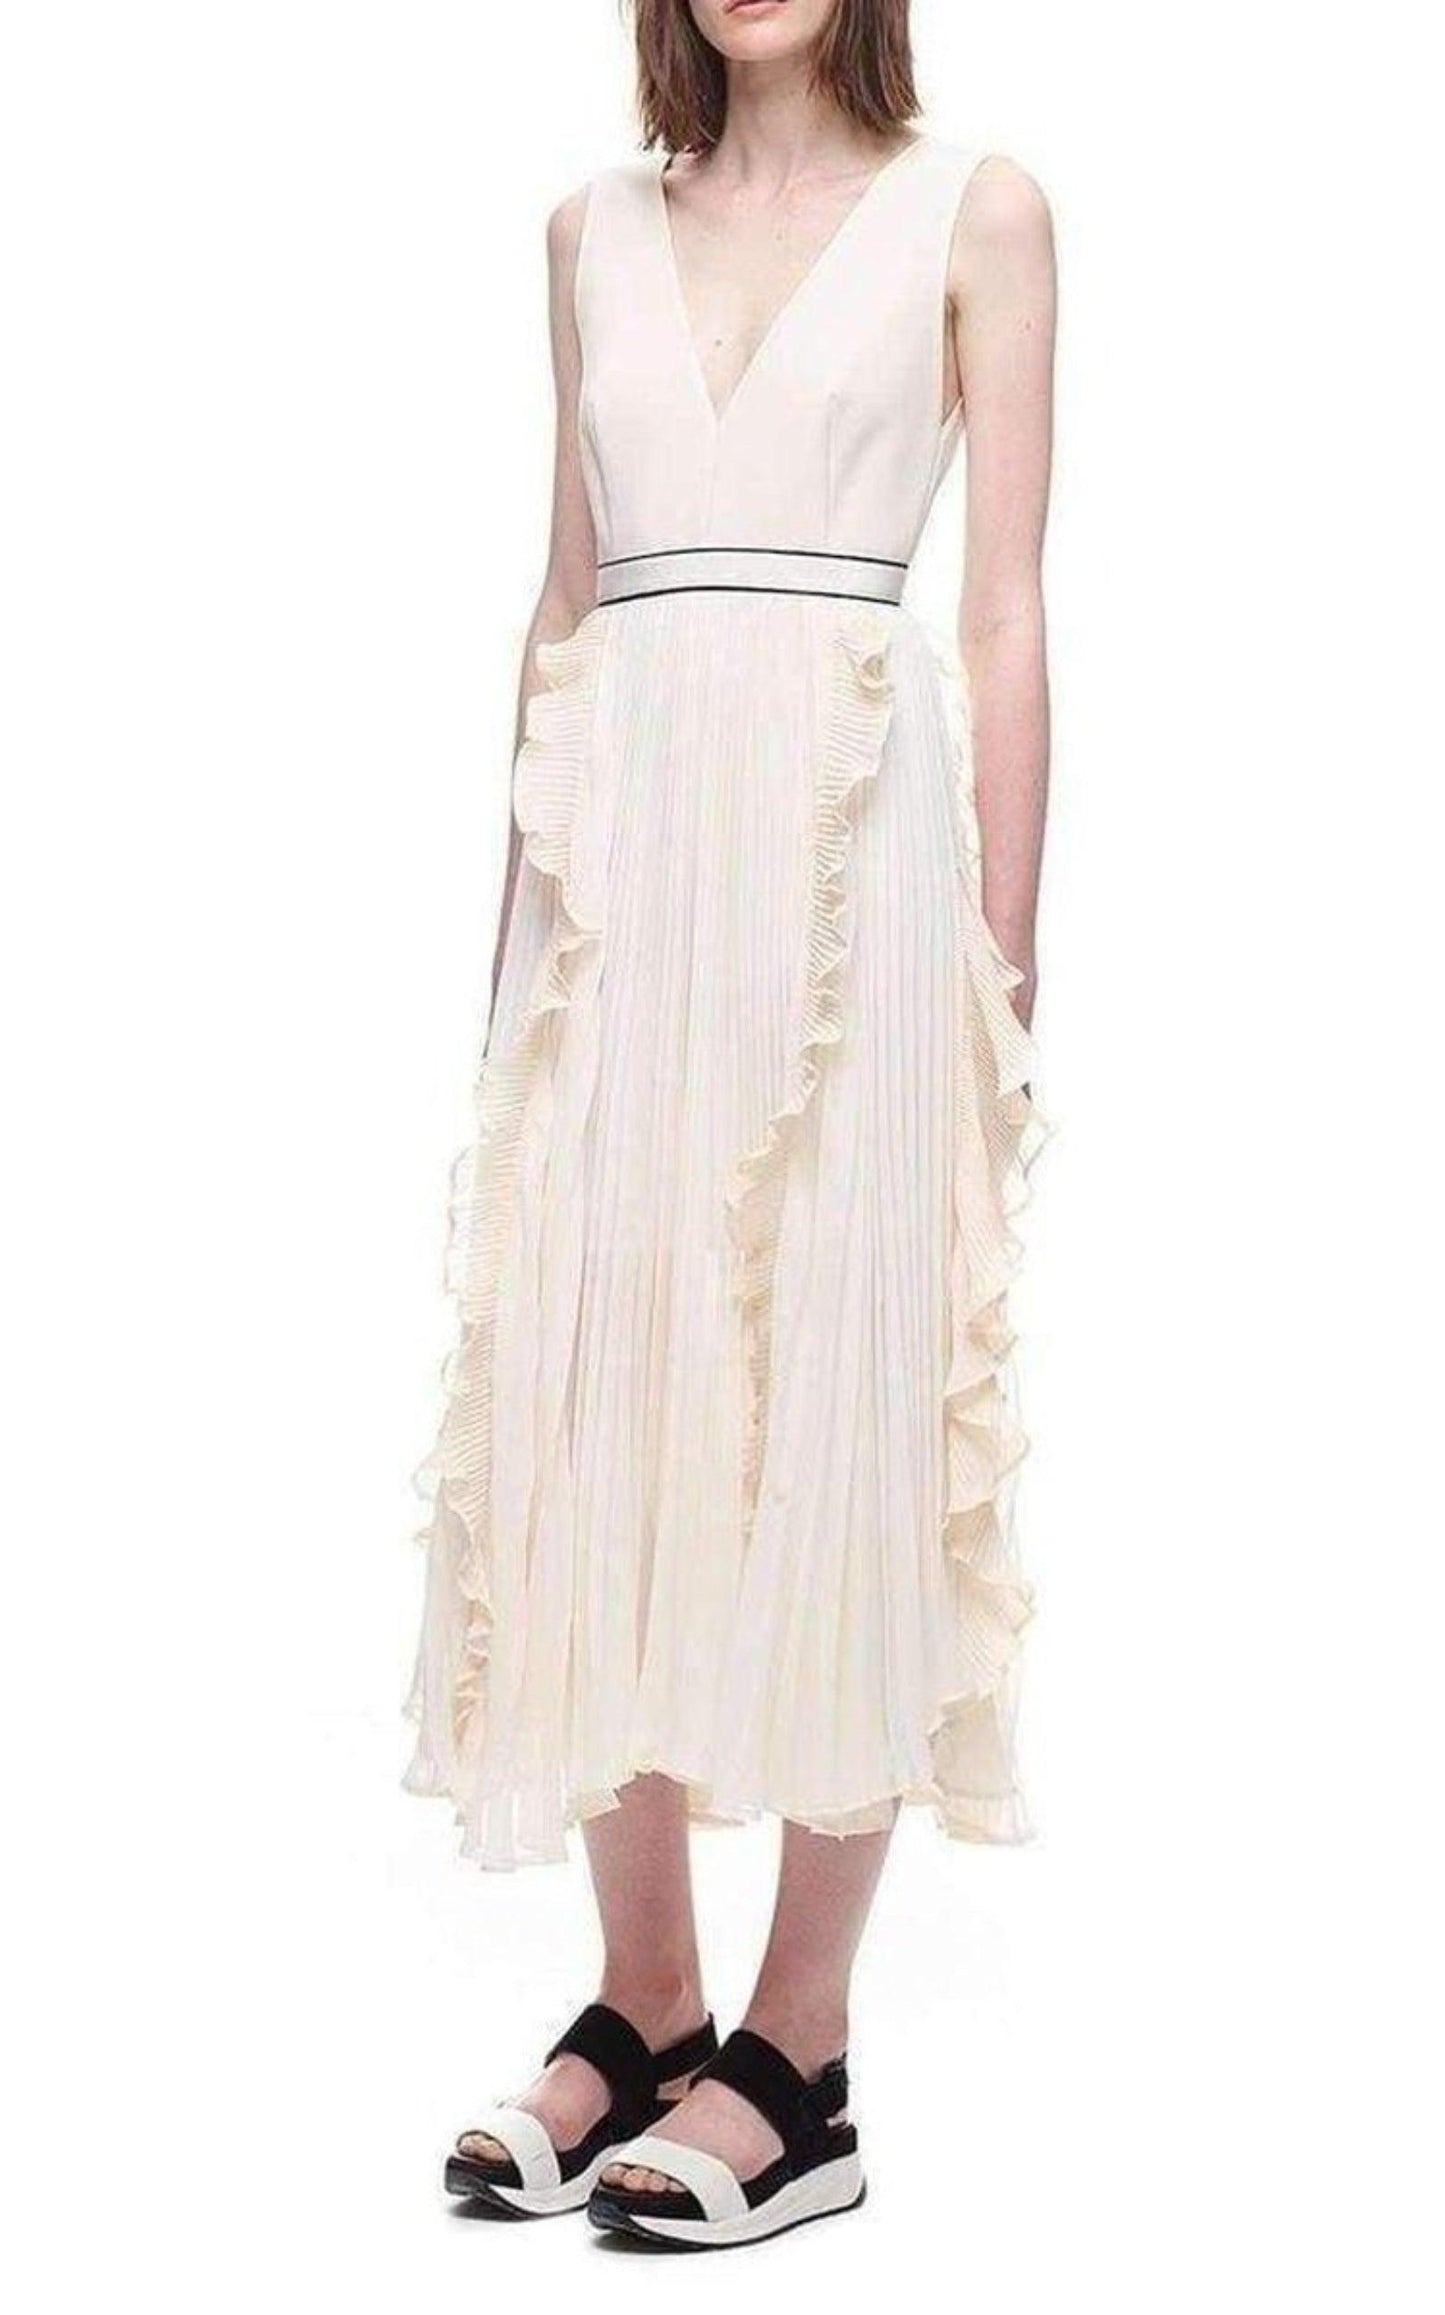  Self-PortraitV-Neck Dress with Fluted Pleats - Runway Catalog